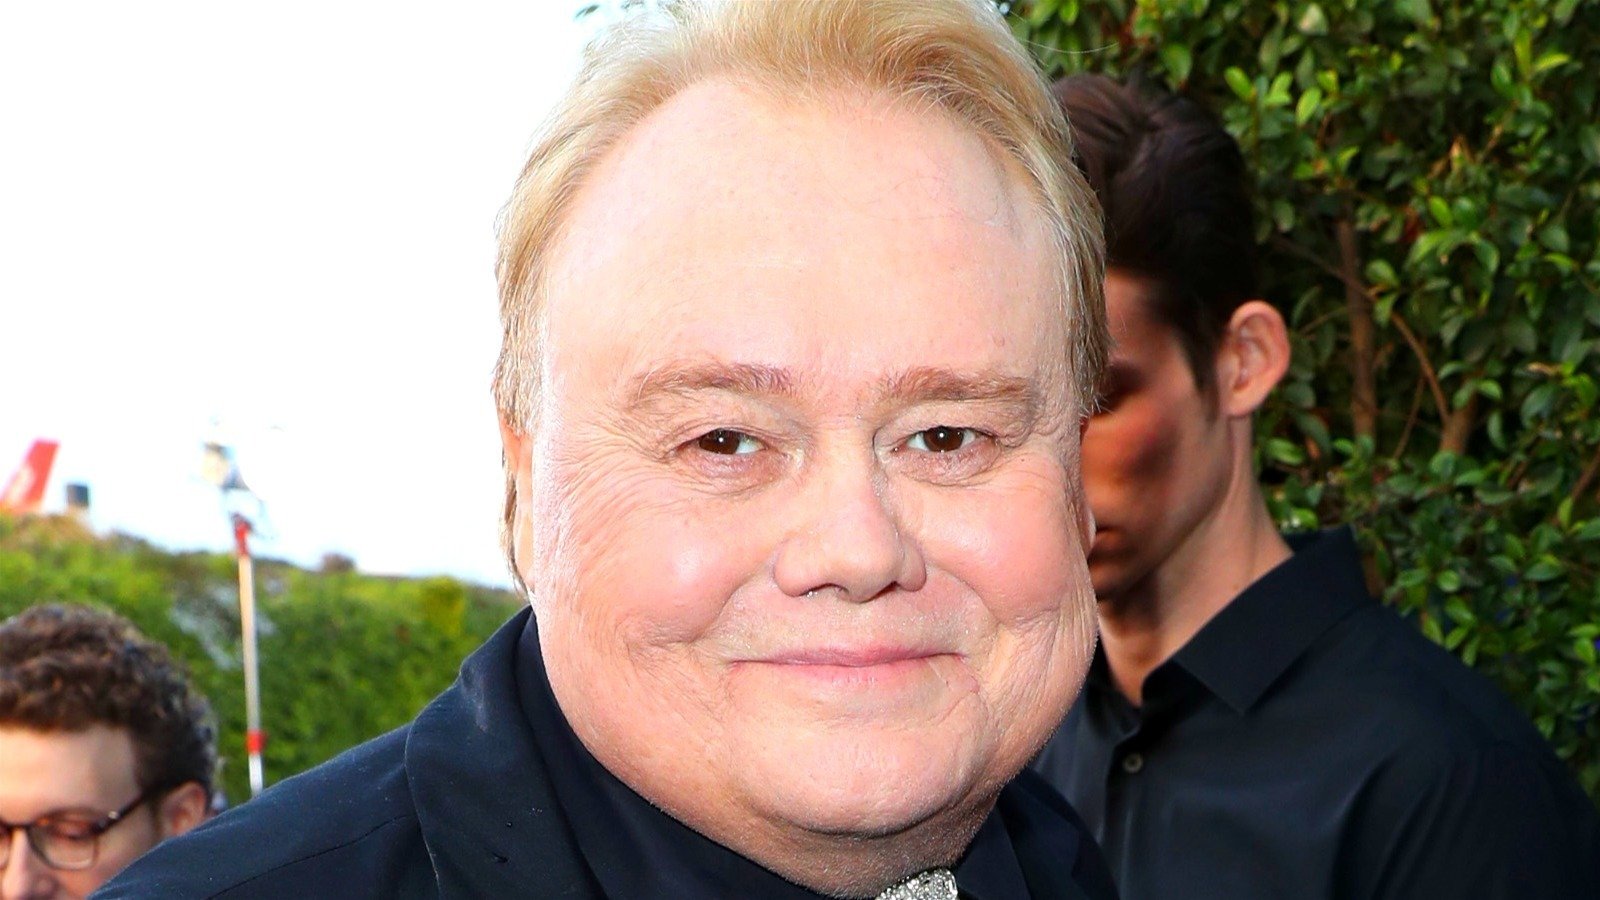 The Last TV Show Louie Anderson Was In Before He Died - Looper